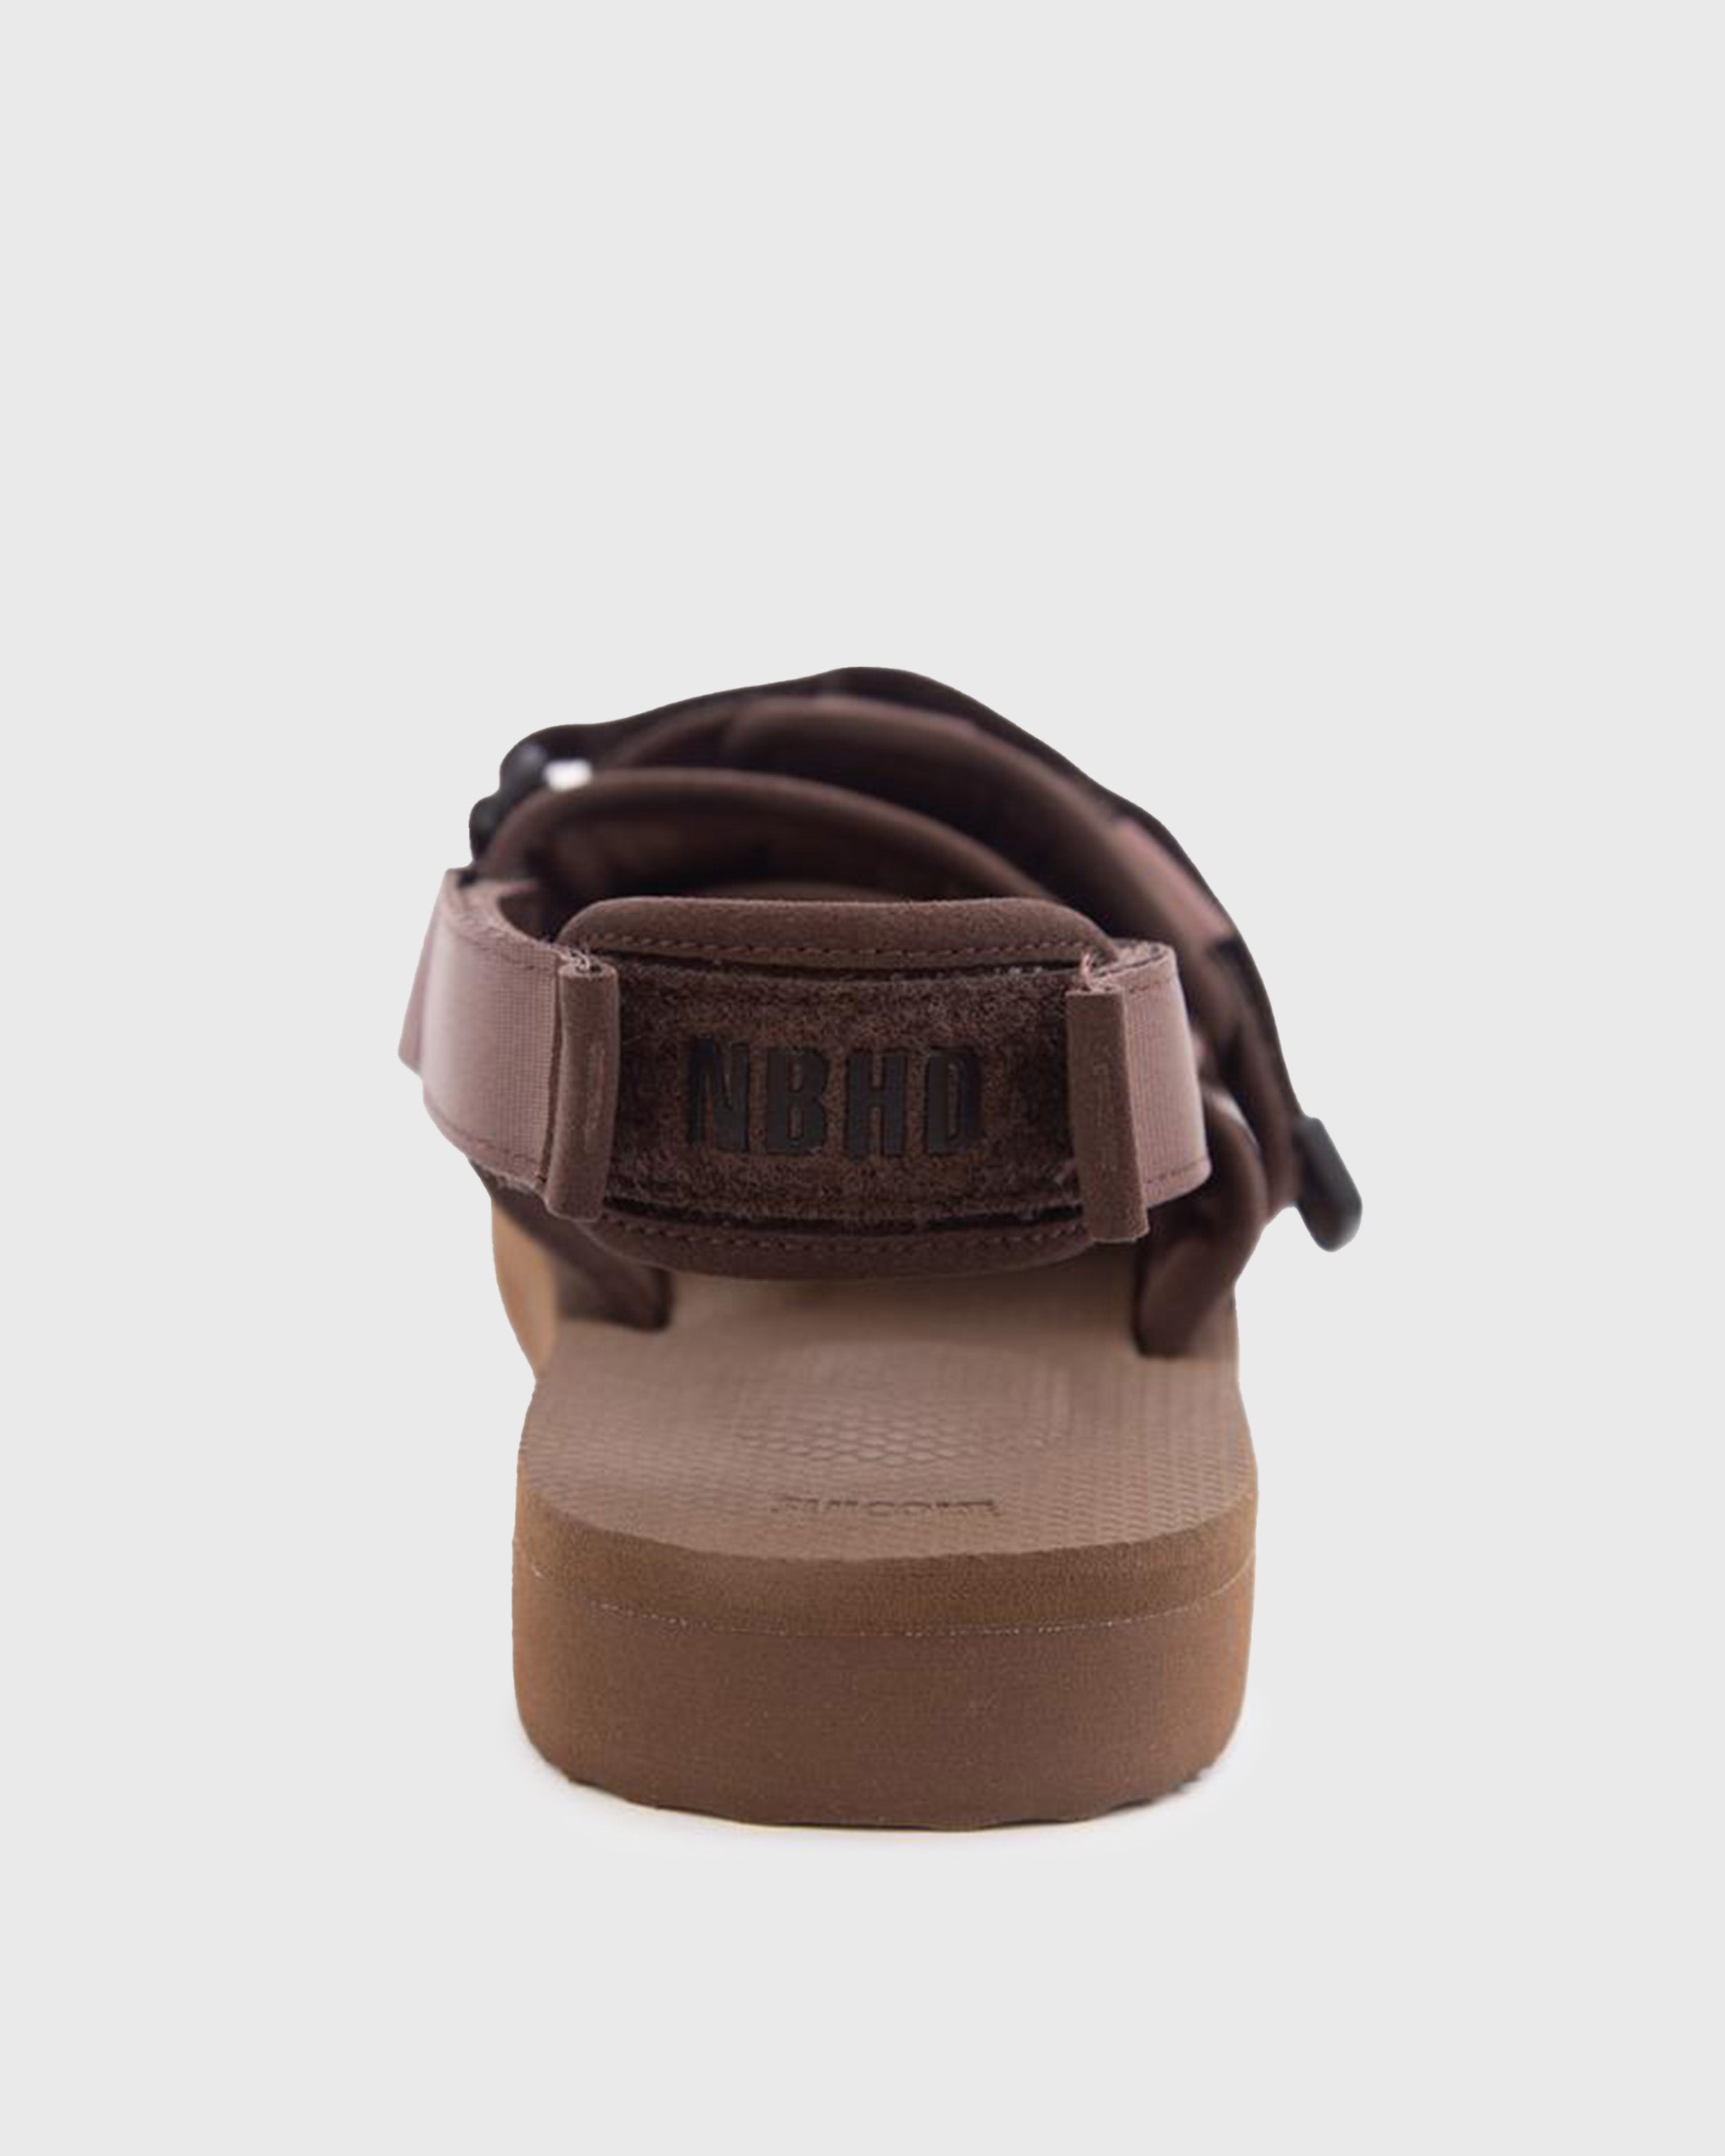 SUICOKE Neighborhood Edition MOTO in Brown OG-056-2NH | Shop from eightywingold an official brand partner for SUICOKE Canada and US.